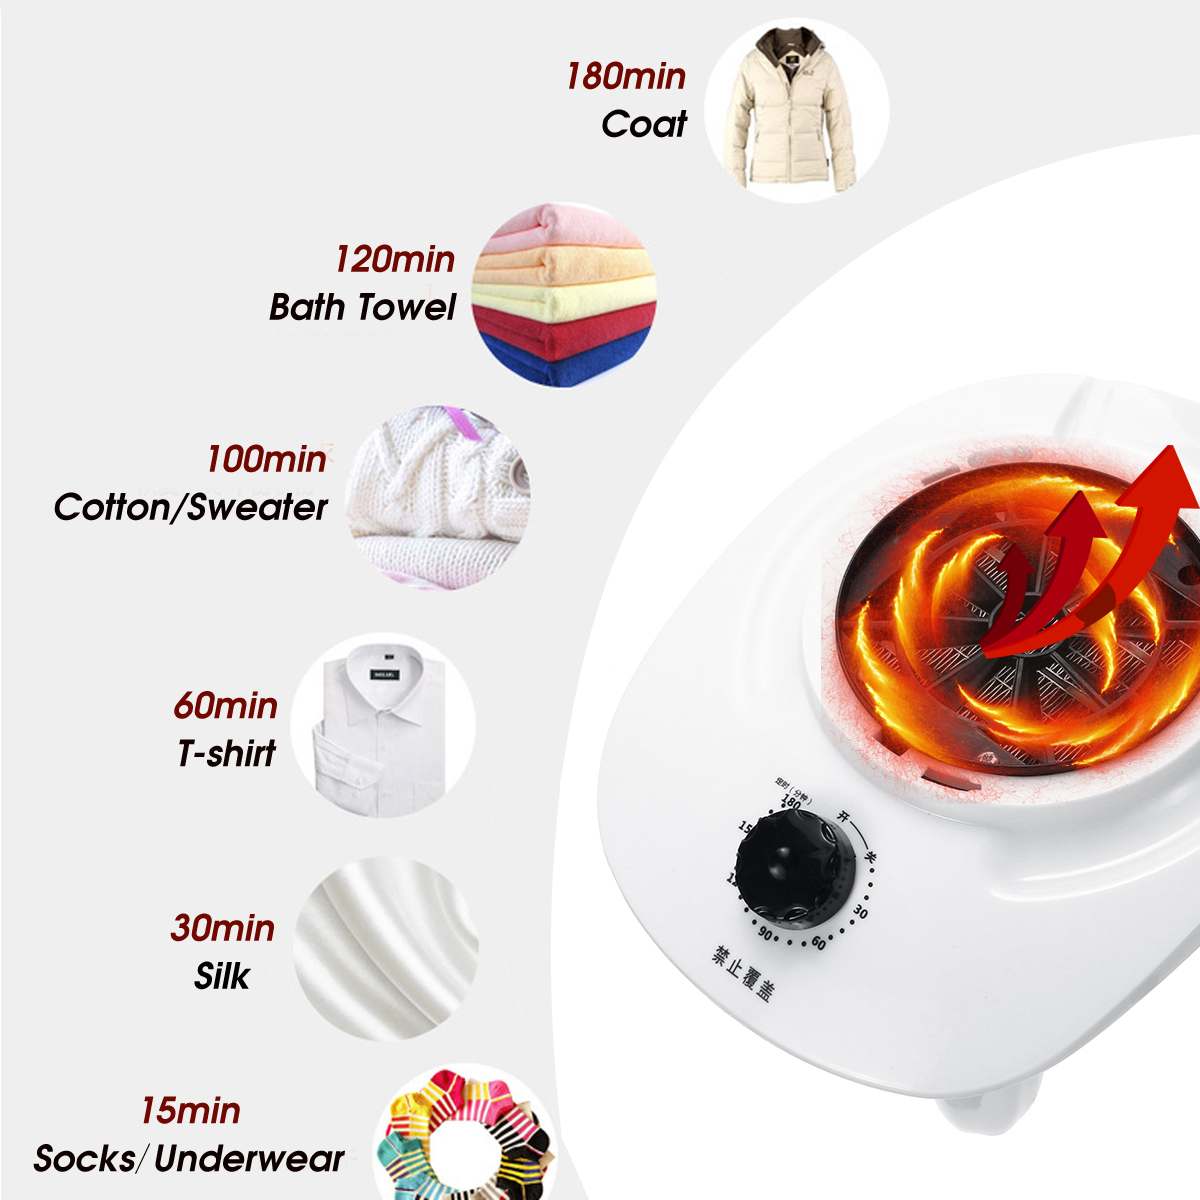 1000W Electric Cloth Dryer Household Portable Cloth Shoes Boots Dryer Power Motor Drying Warm Wind Laundry Garment 180 min Timer